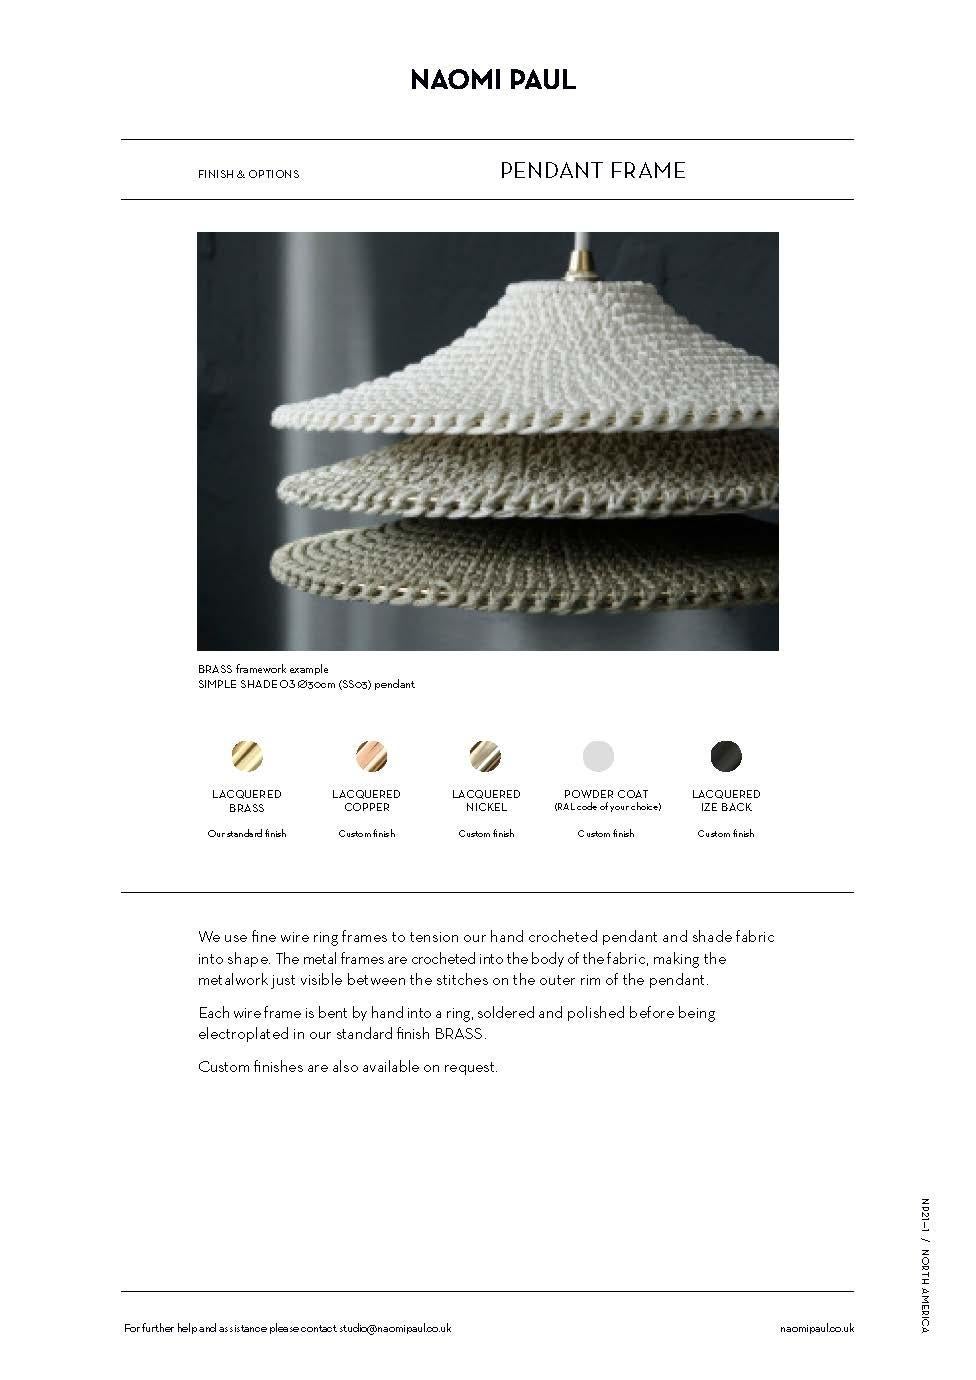 British BAMBOO SOLITAIRE 01 Pendant Light Ø60cm/23.6in, Hand Crocheted in Bamboo Paper